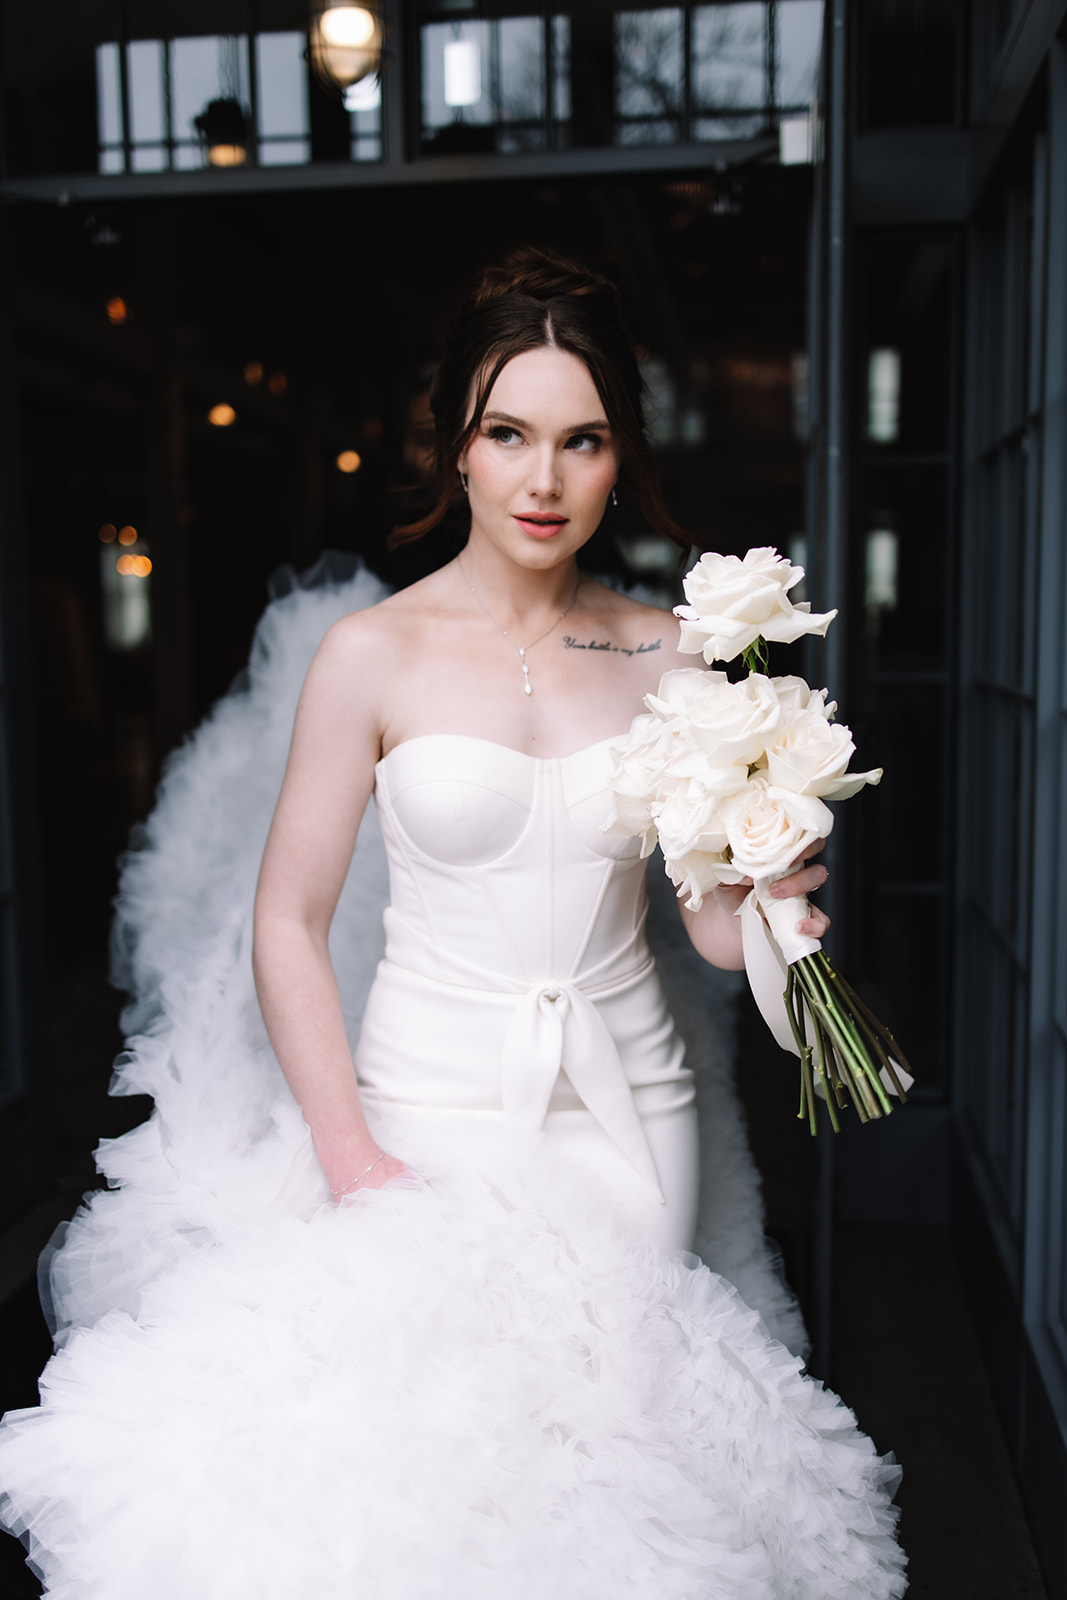 A beautiful, luxury bride in a voluptuous wedding dress walking through the door at the Machine Shop in Minneapolis holding a white bouquet